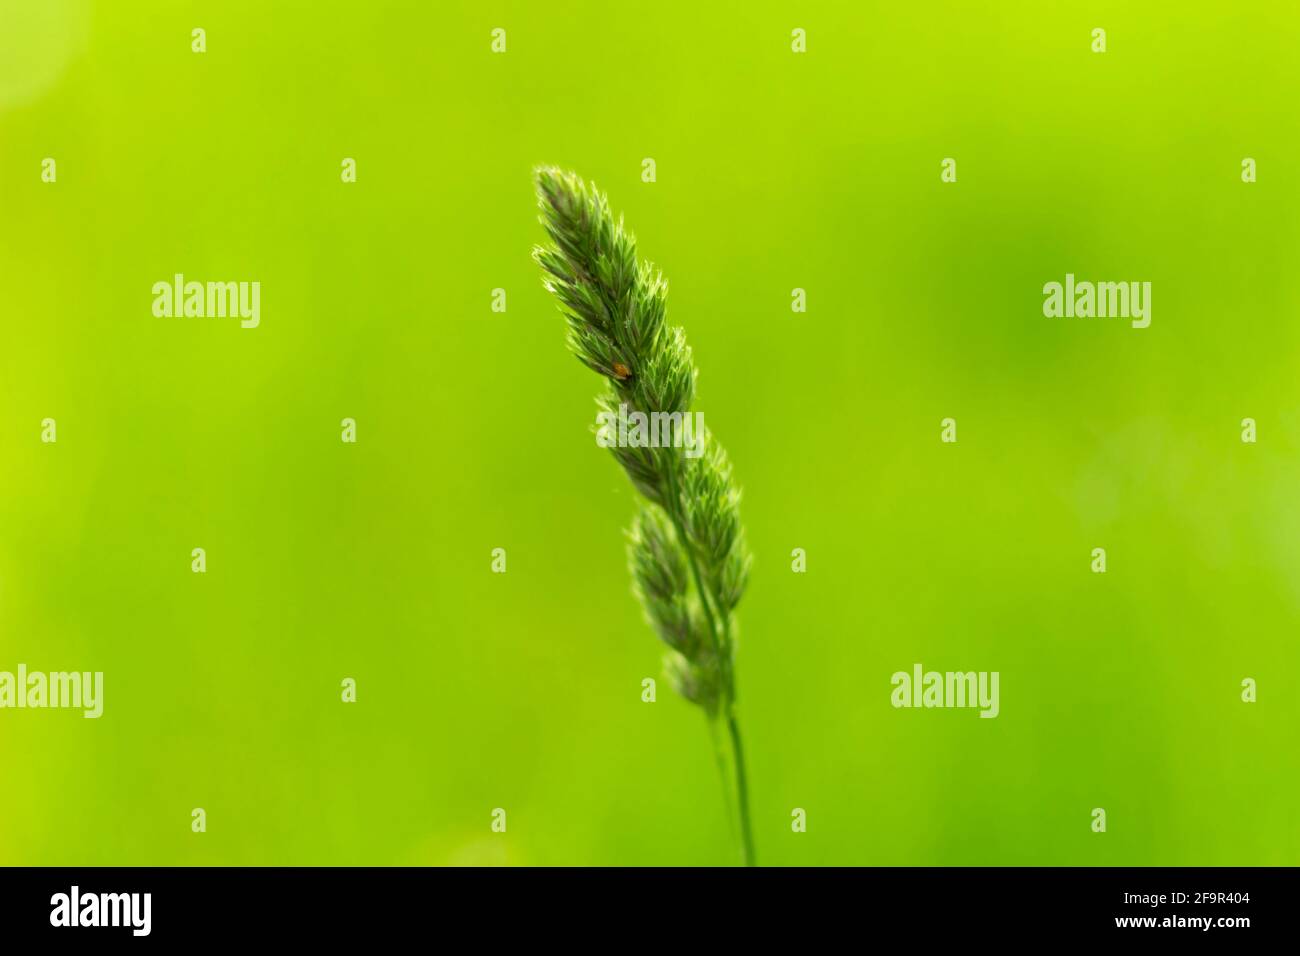 green plant on green background Stock Photo